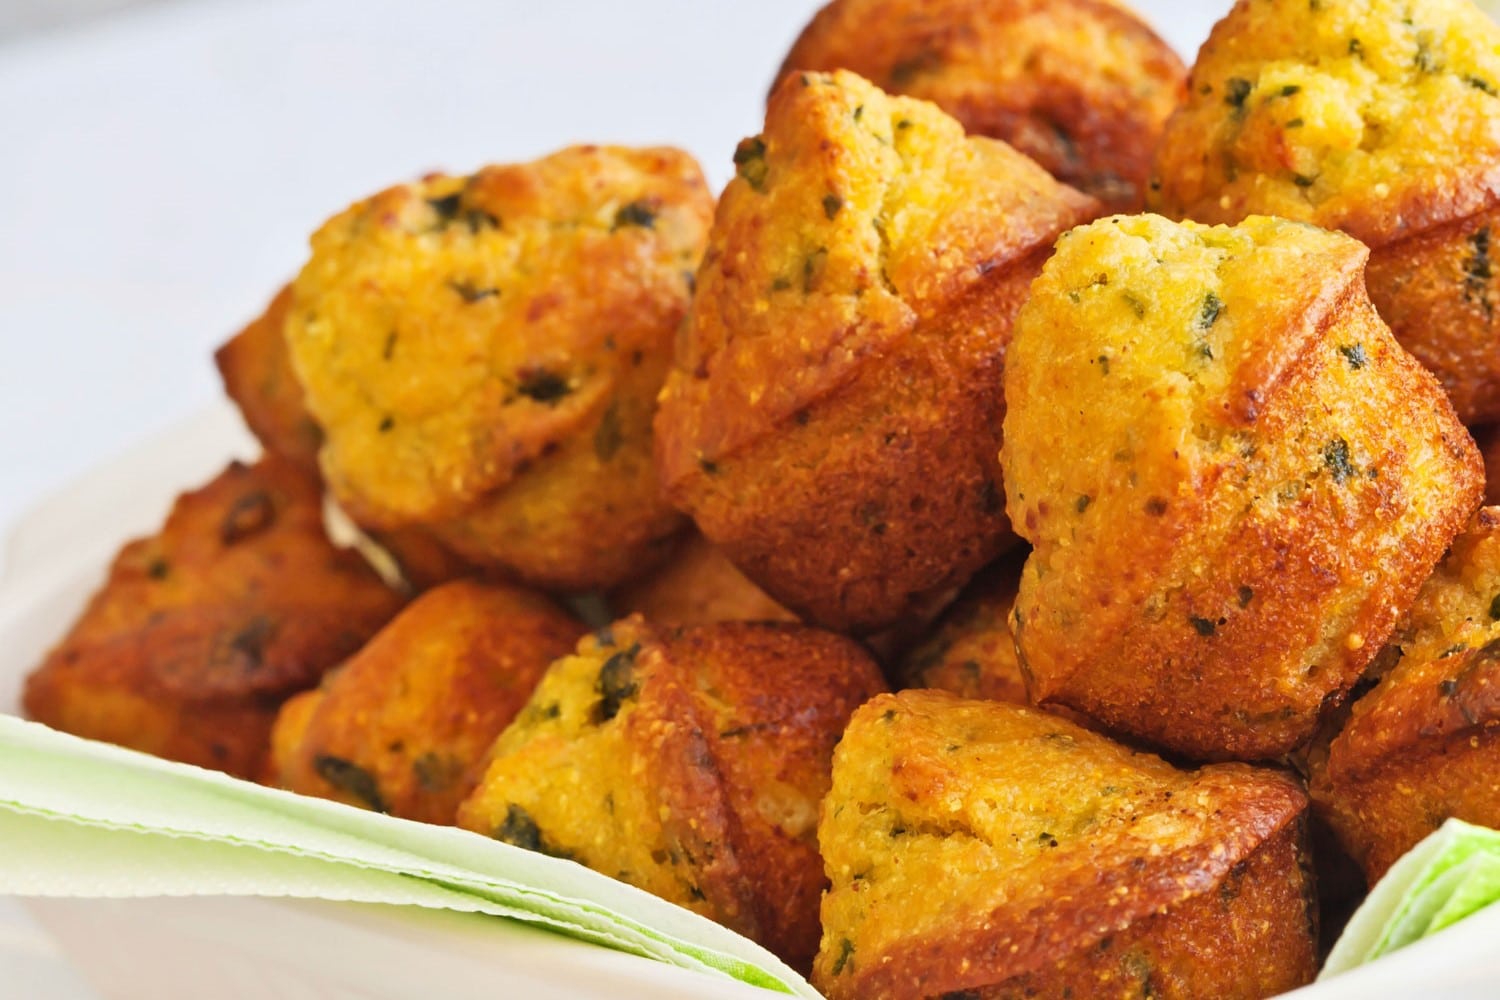 Get the Mini Corn Muffins with Roasted Garlic and Fresh Herbs recipe!